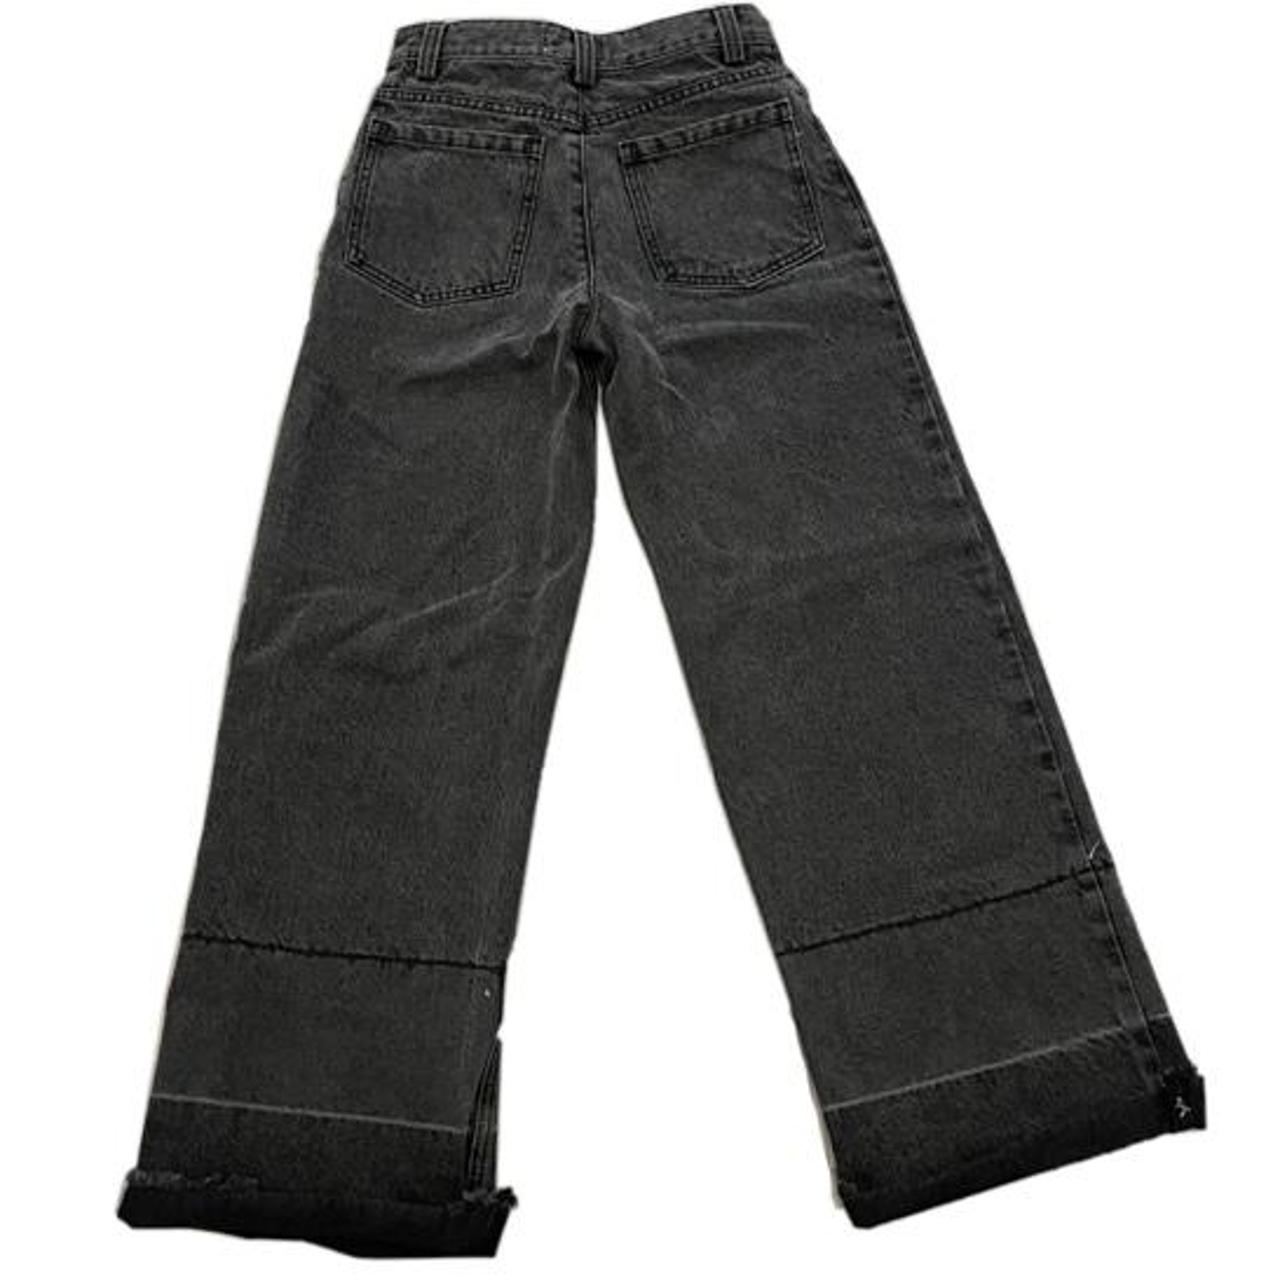 EVIDNT Women's Black and Grey Jeans (2)